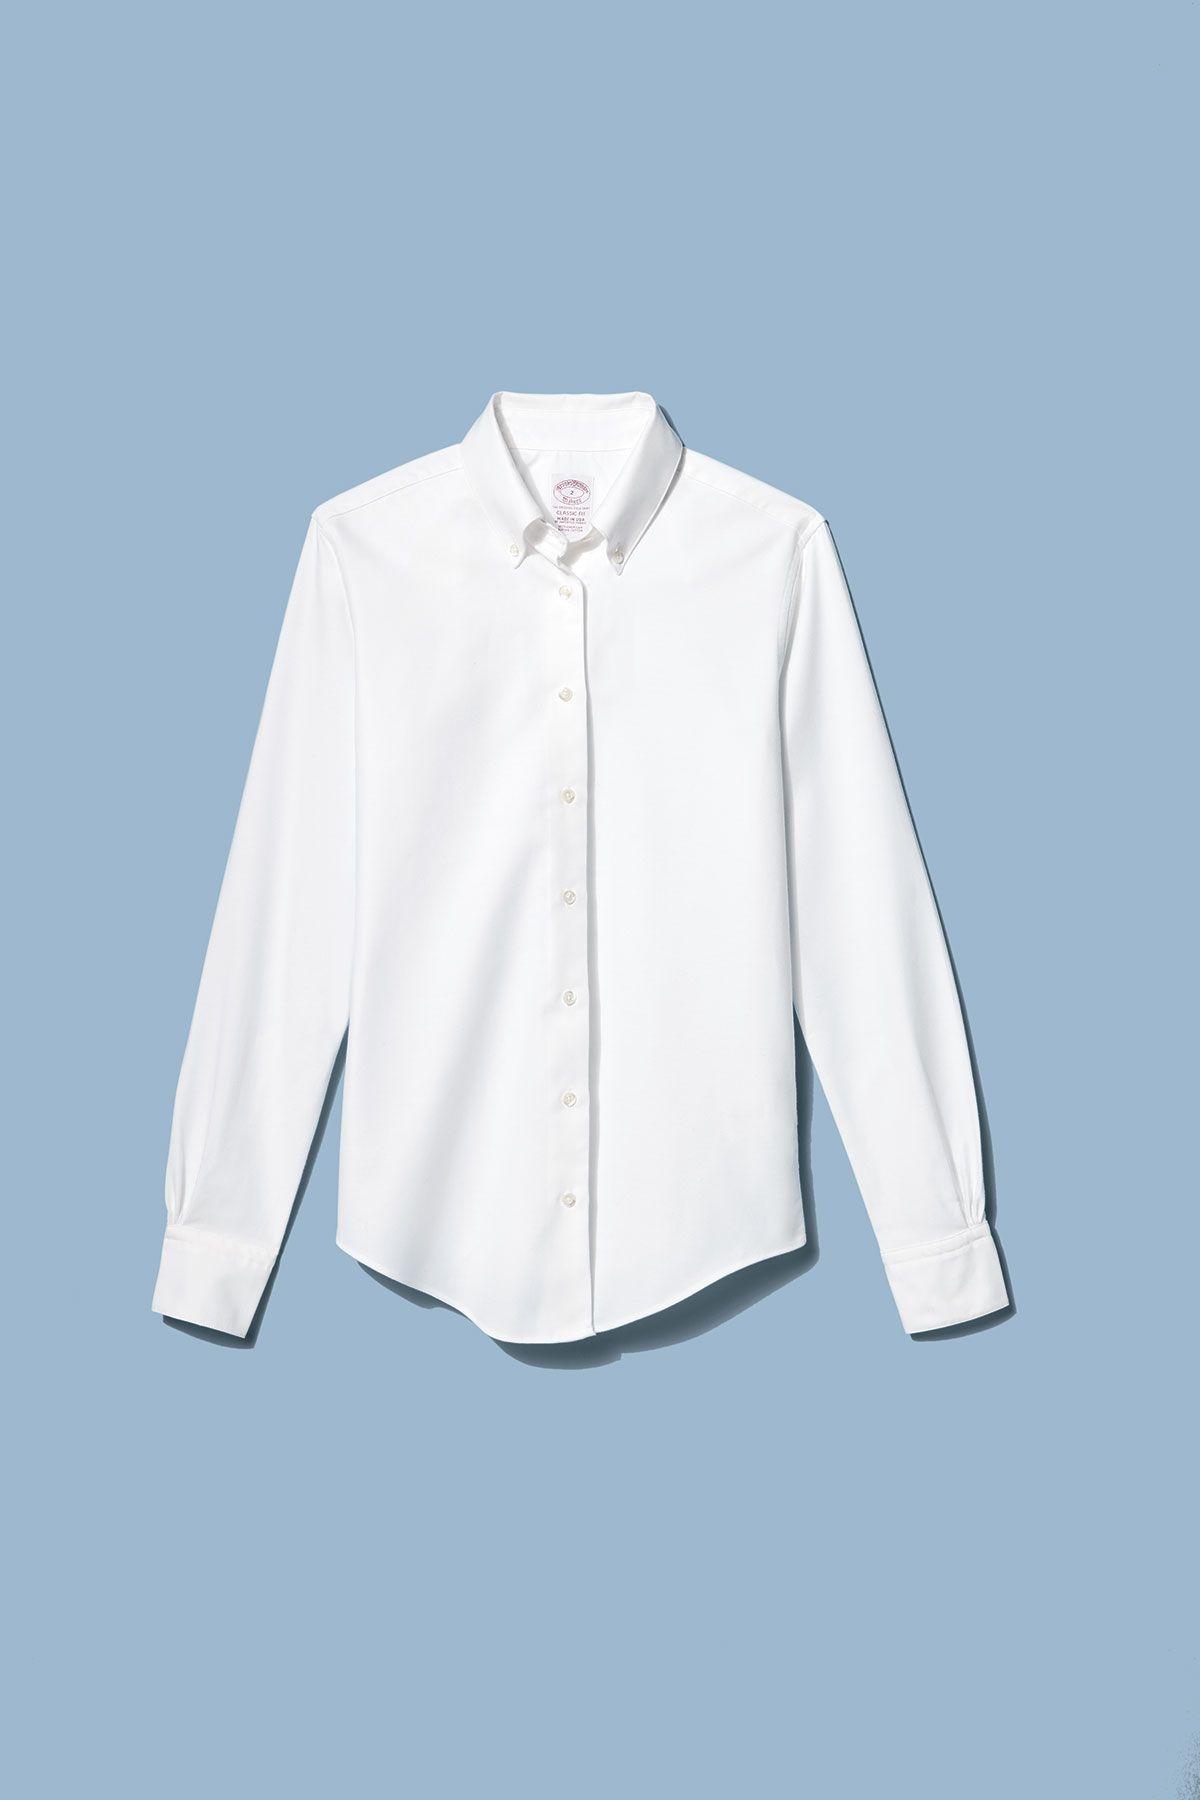 Brooks Brothers Classic-Fit Supima Cotton Oxford Button-Down პერანგი